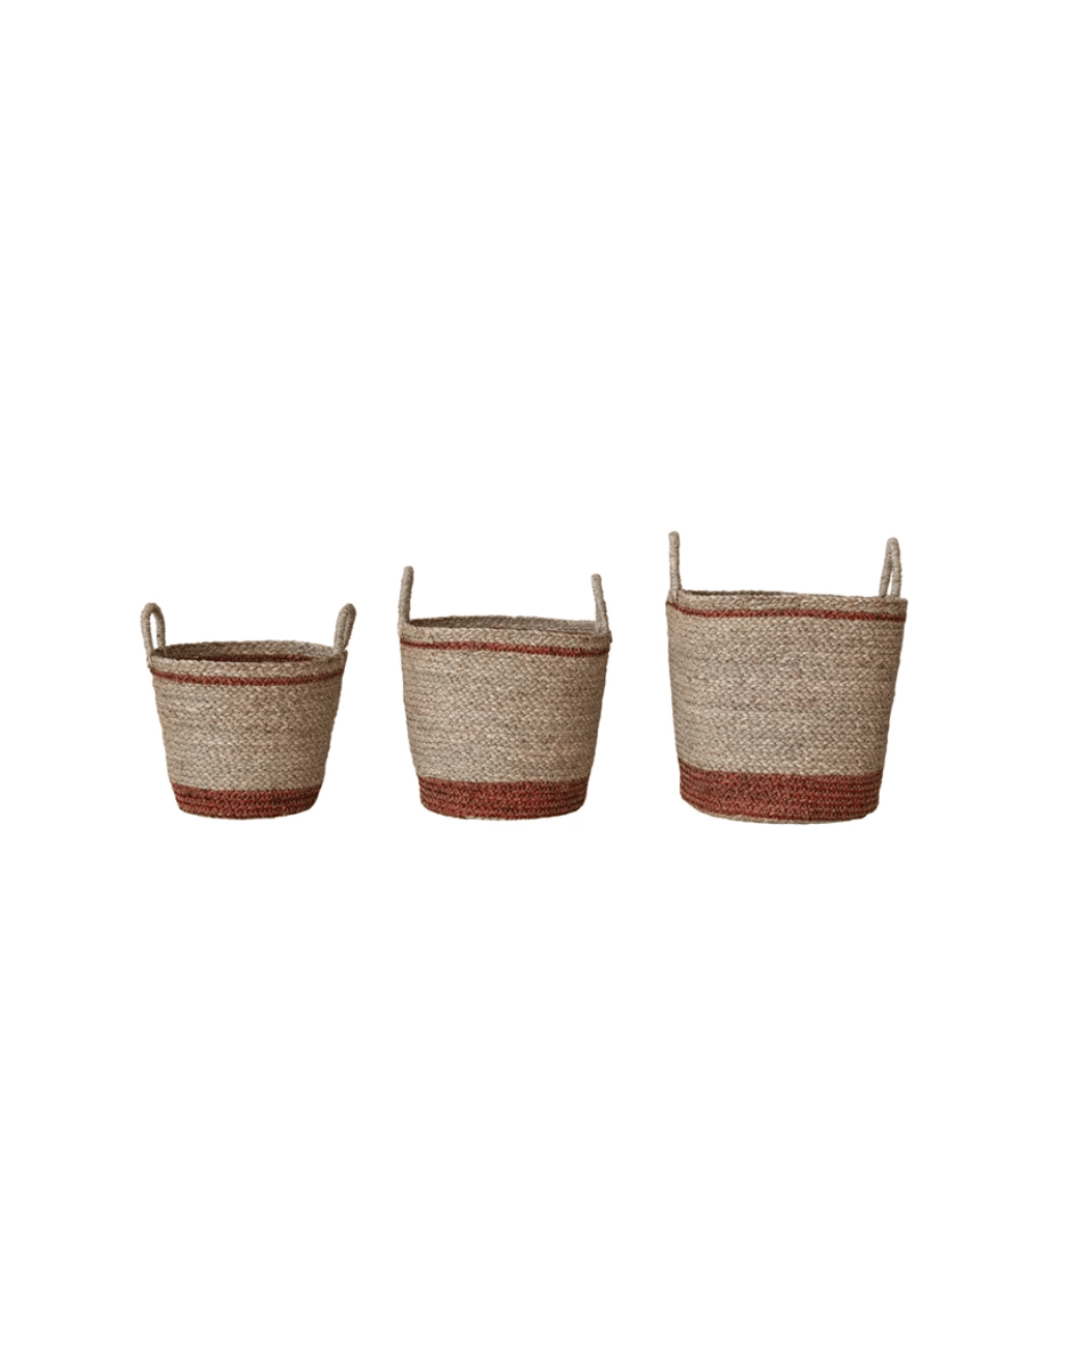 Three Seagrass Baskets with Brown Stripe & Handles by Creative Co-op, in different sizes, lined up and featuring brown and natural hues, each styled in a bungalow theme against a white background.